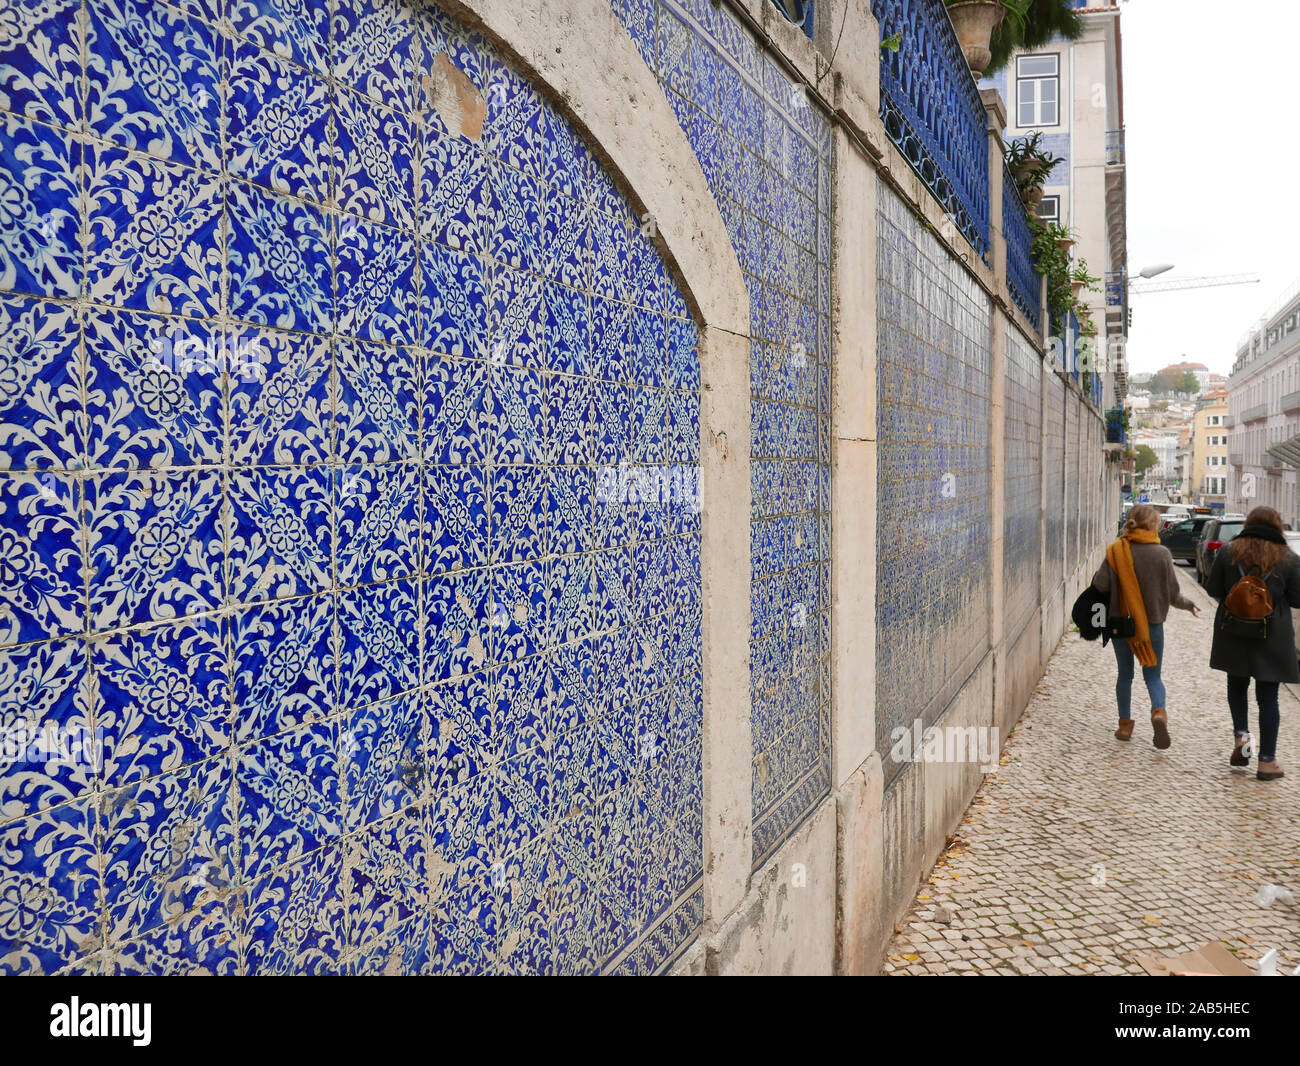 Blue and white tiling on the side of a building in the Santos area of lisbon Portugal with two people walking along the pavement alongside Stock Photo